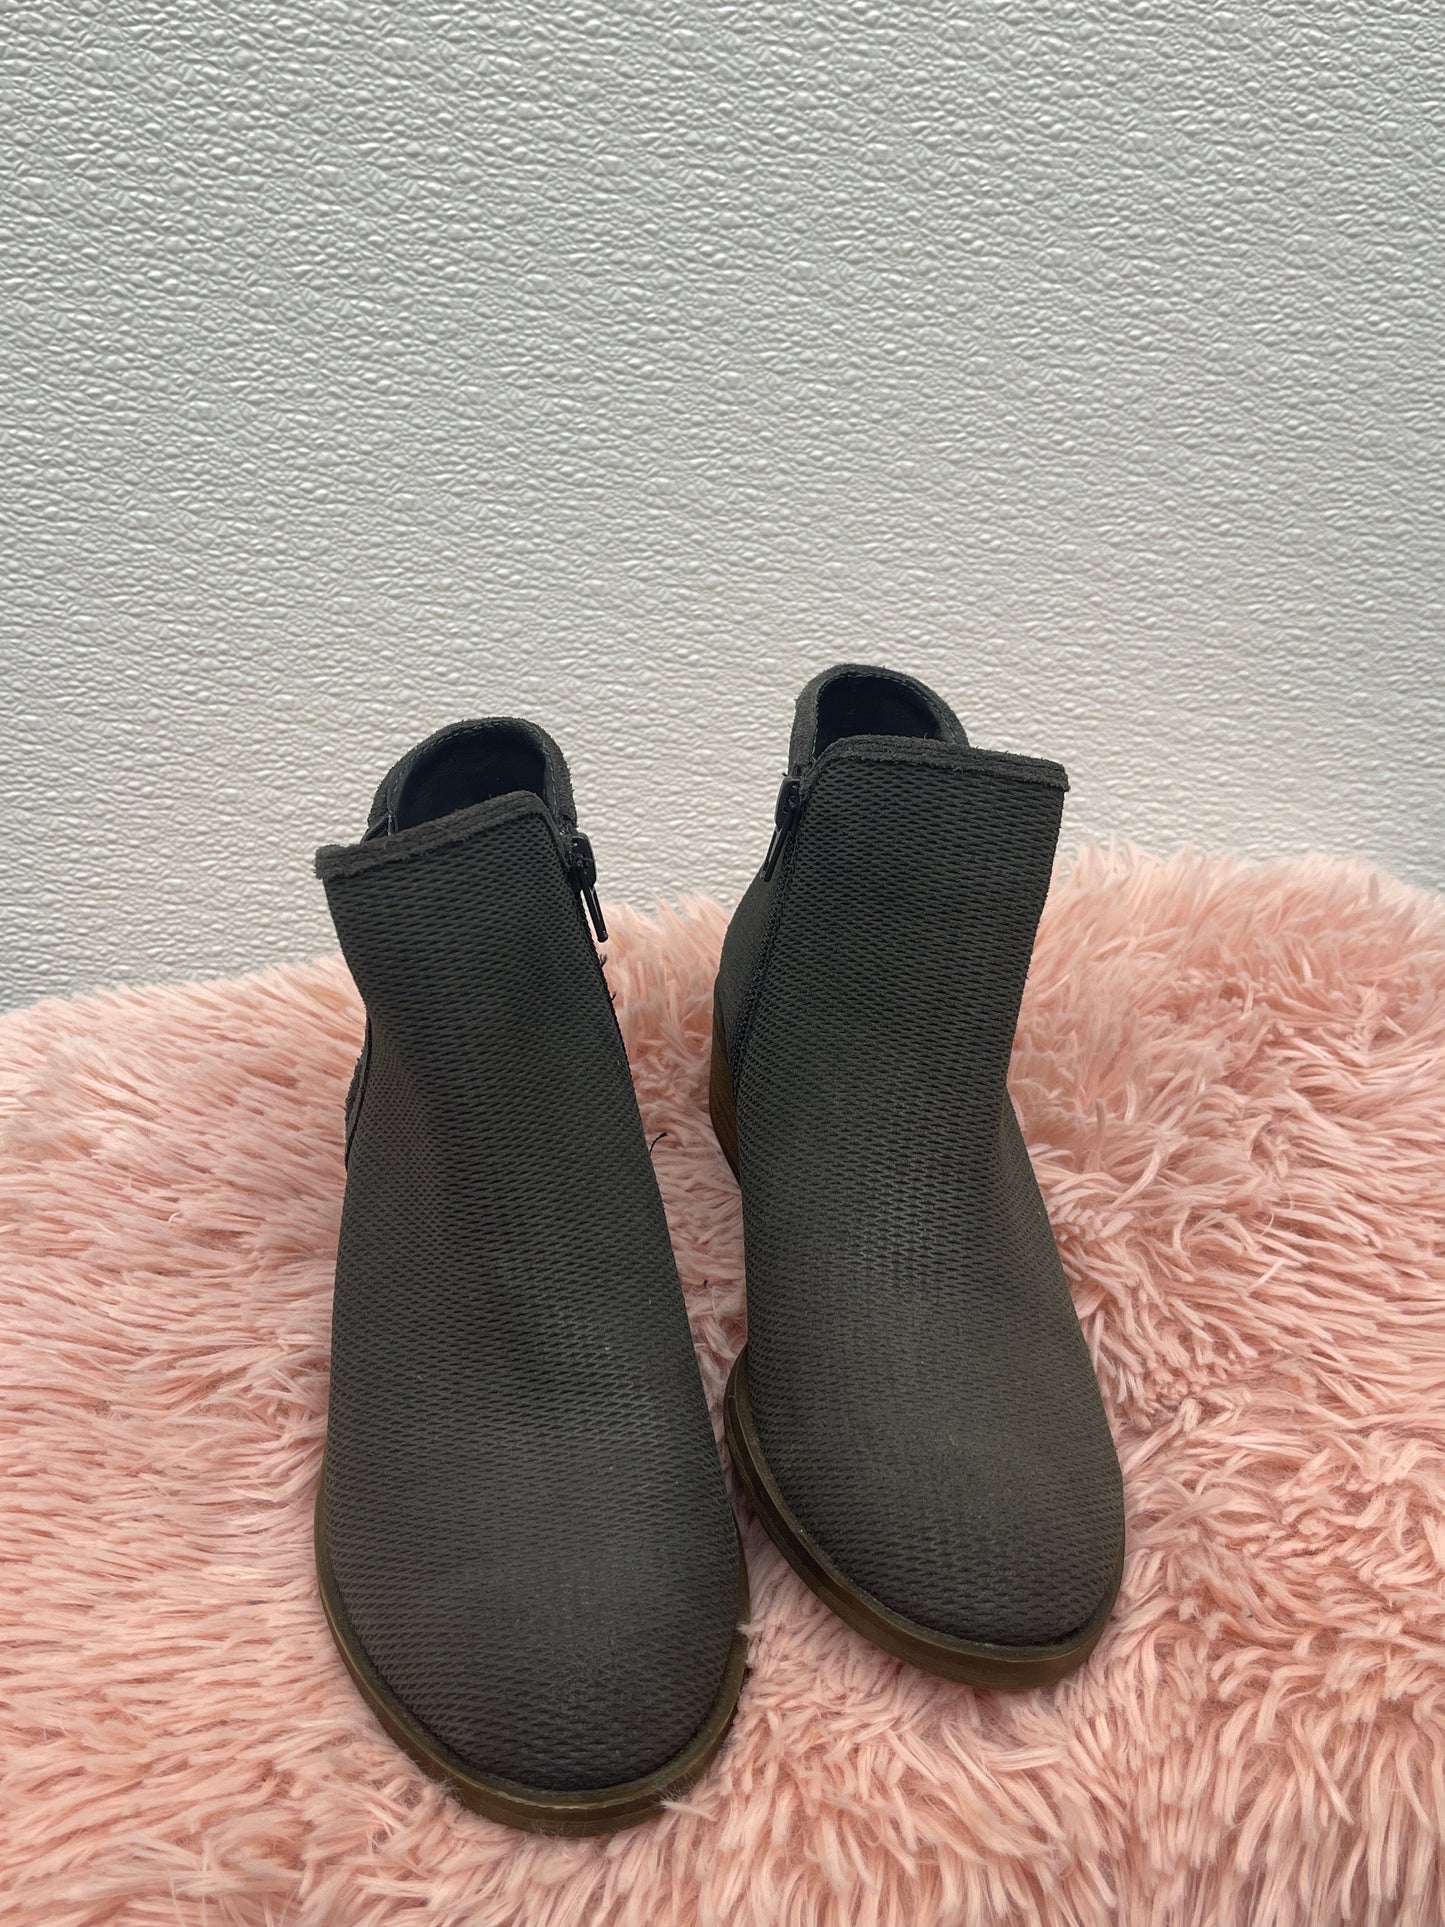 Boots Ankle Flats By Kensie  Size: 6.5